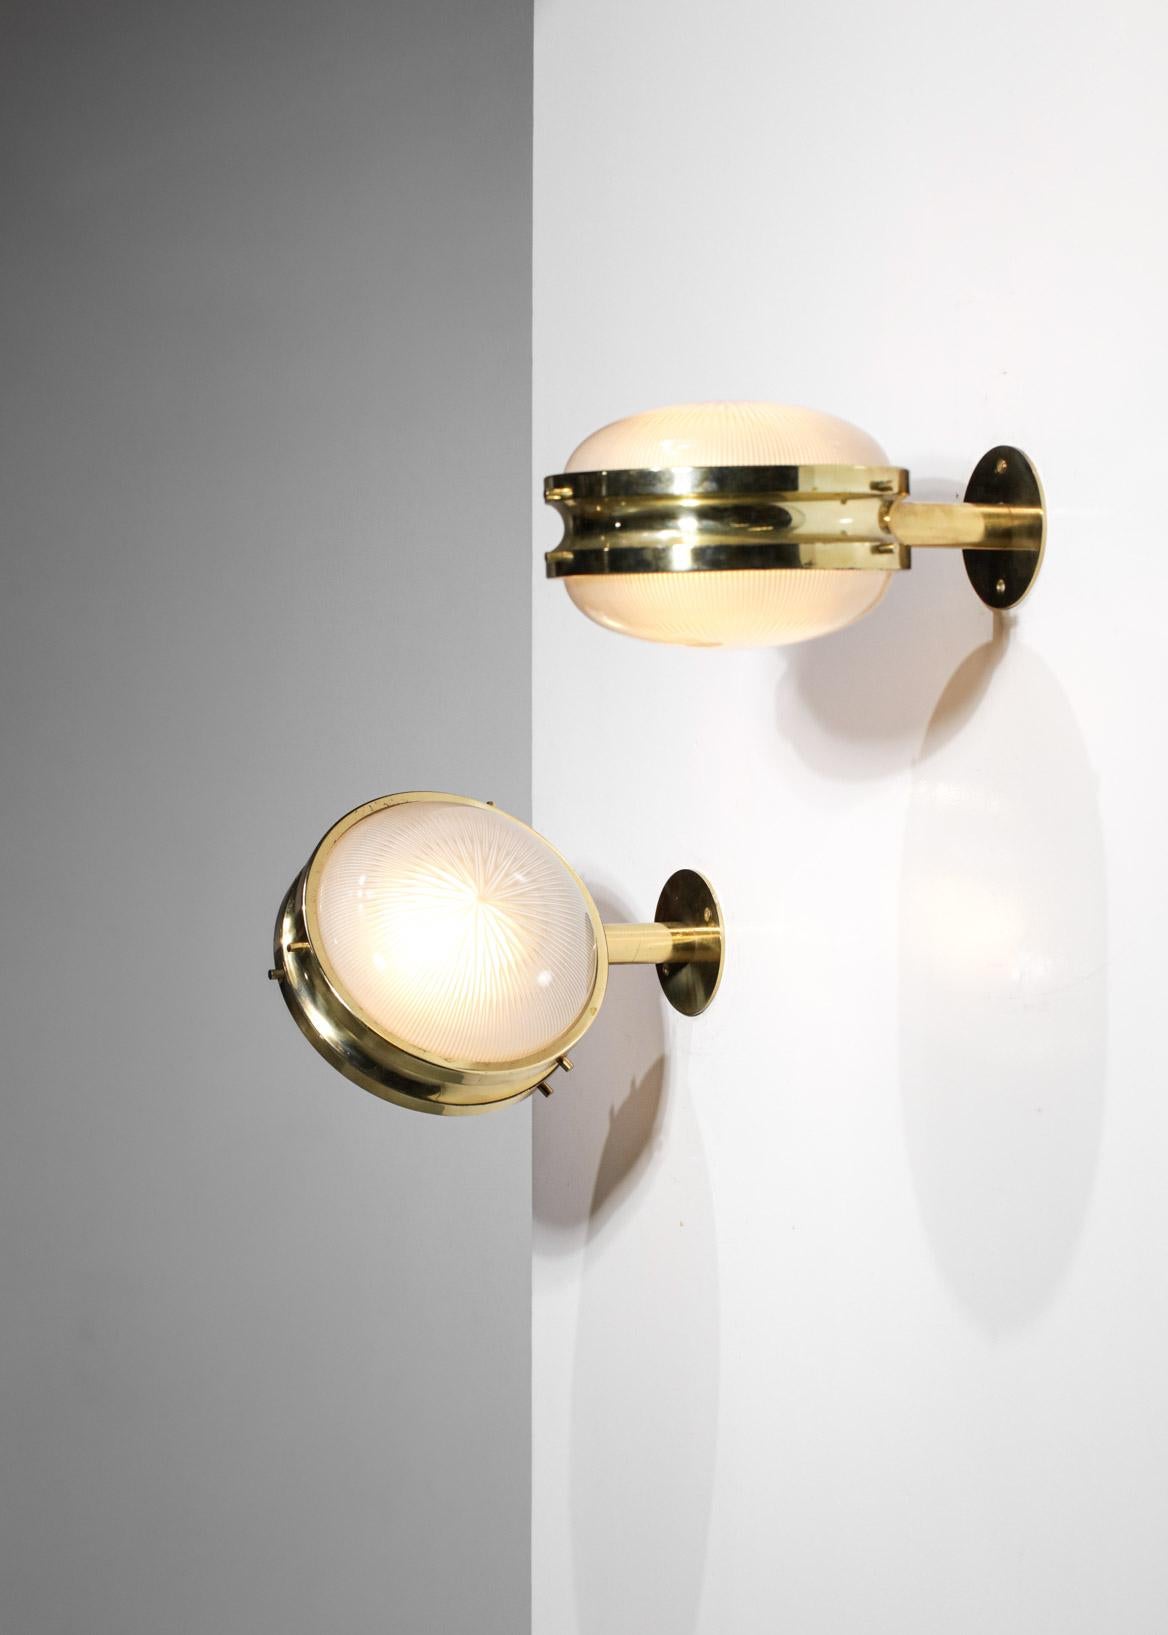 Pair of wall sconces from the 60's by the Italian designer Sergio Mazza for Artemide, model 